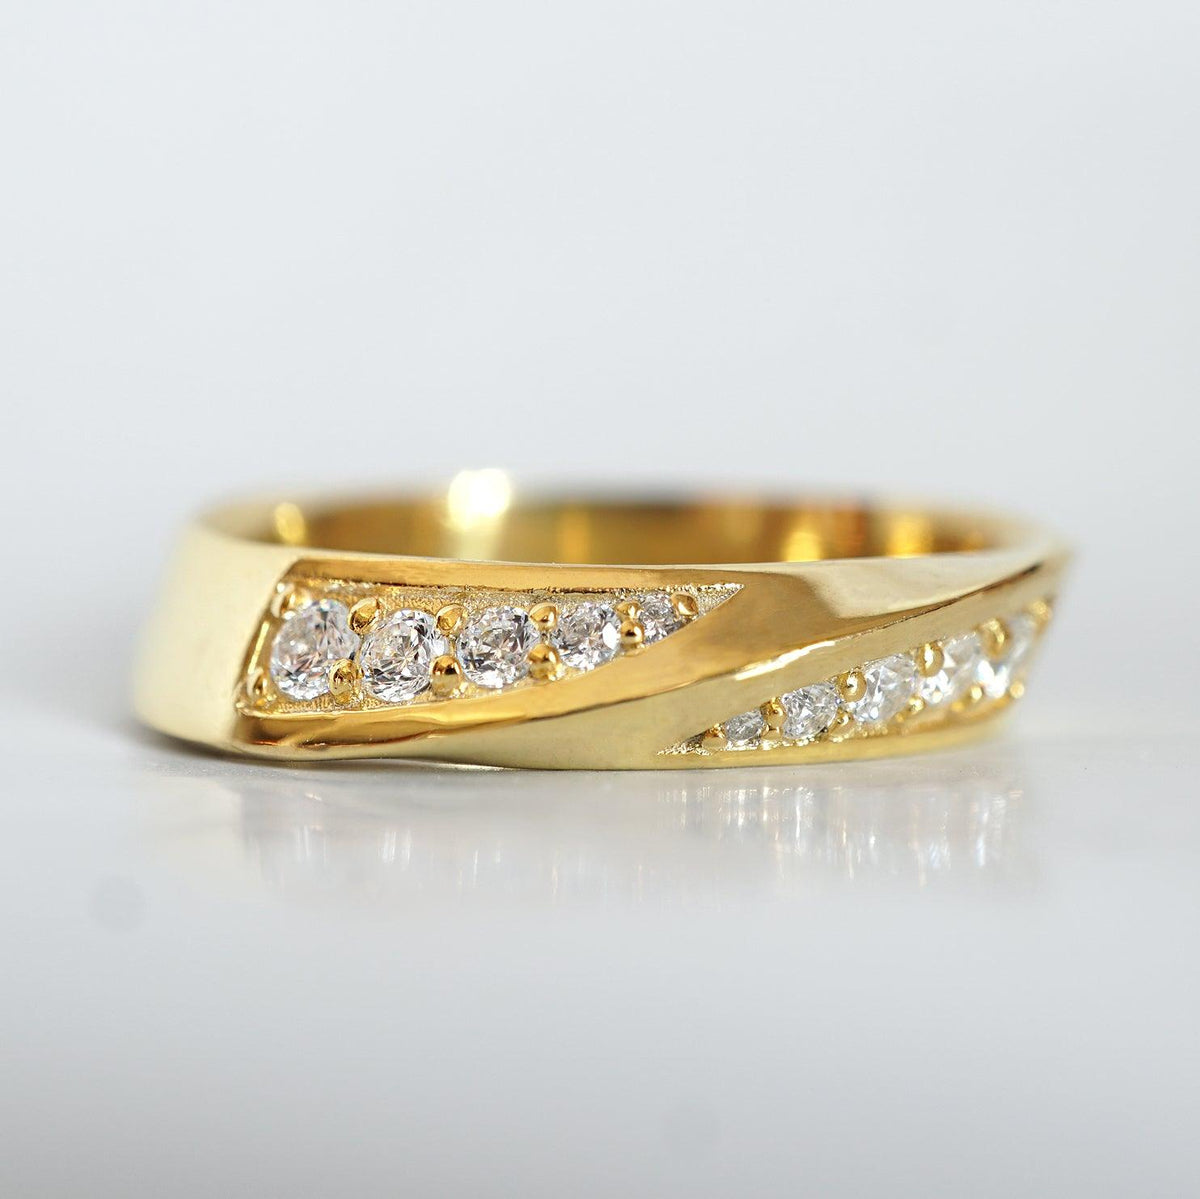 Spiral Diamond Ring in 14K and 18K Gold, 5mm